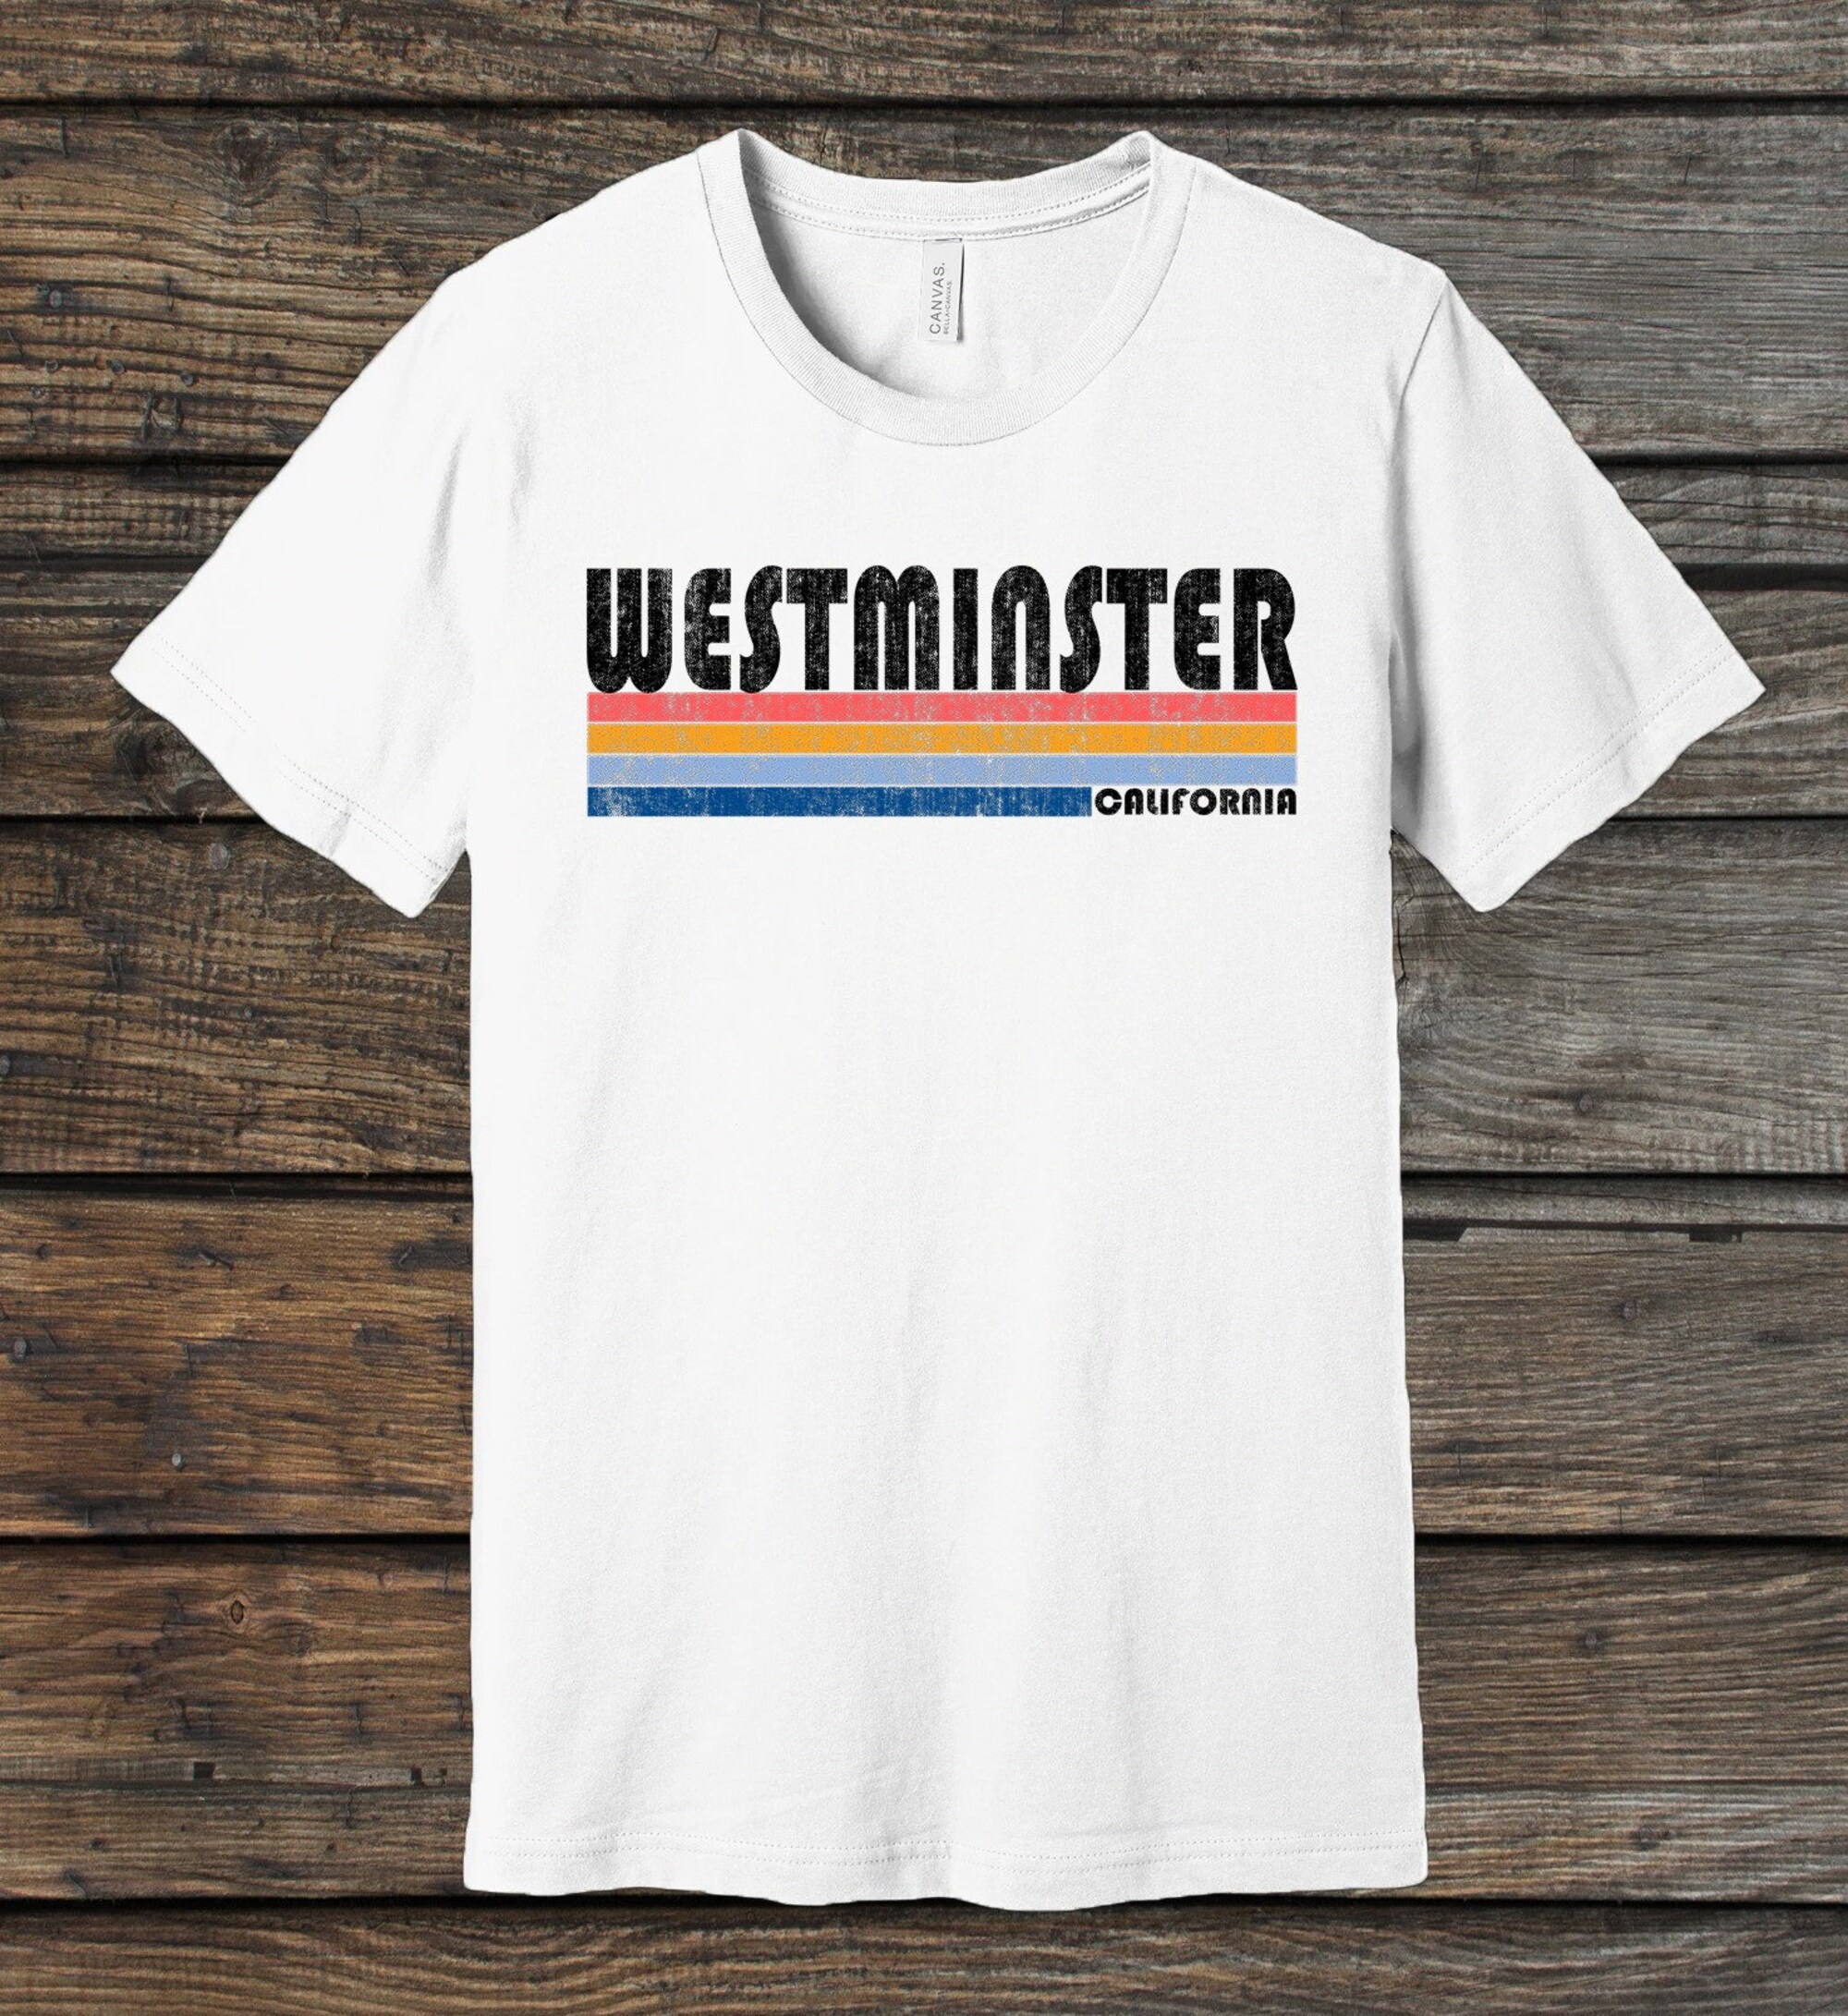 Discover 70s 80s Style Westminster, California Tshirt